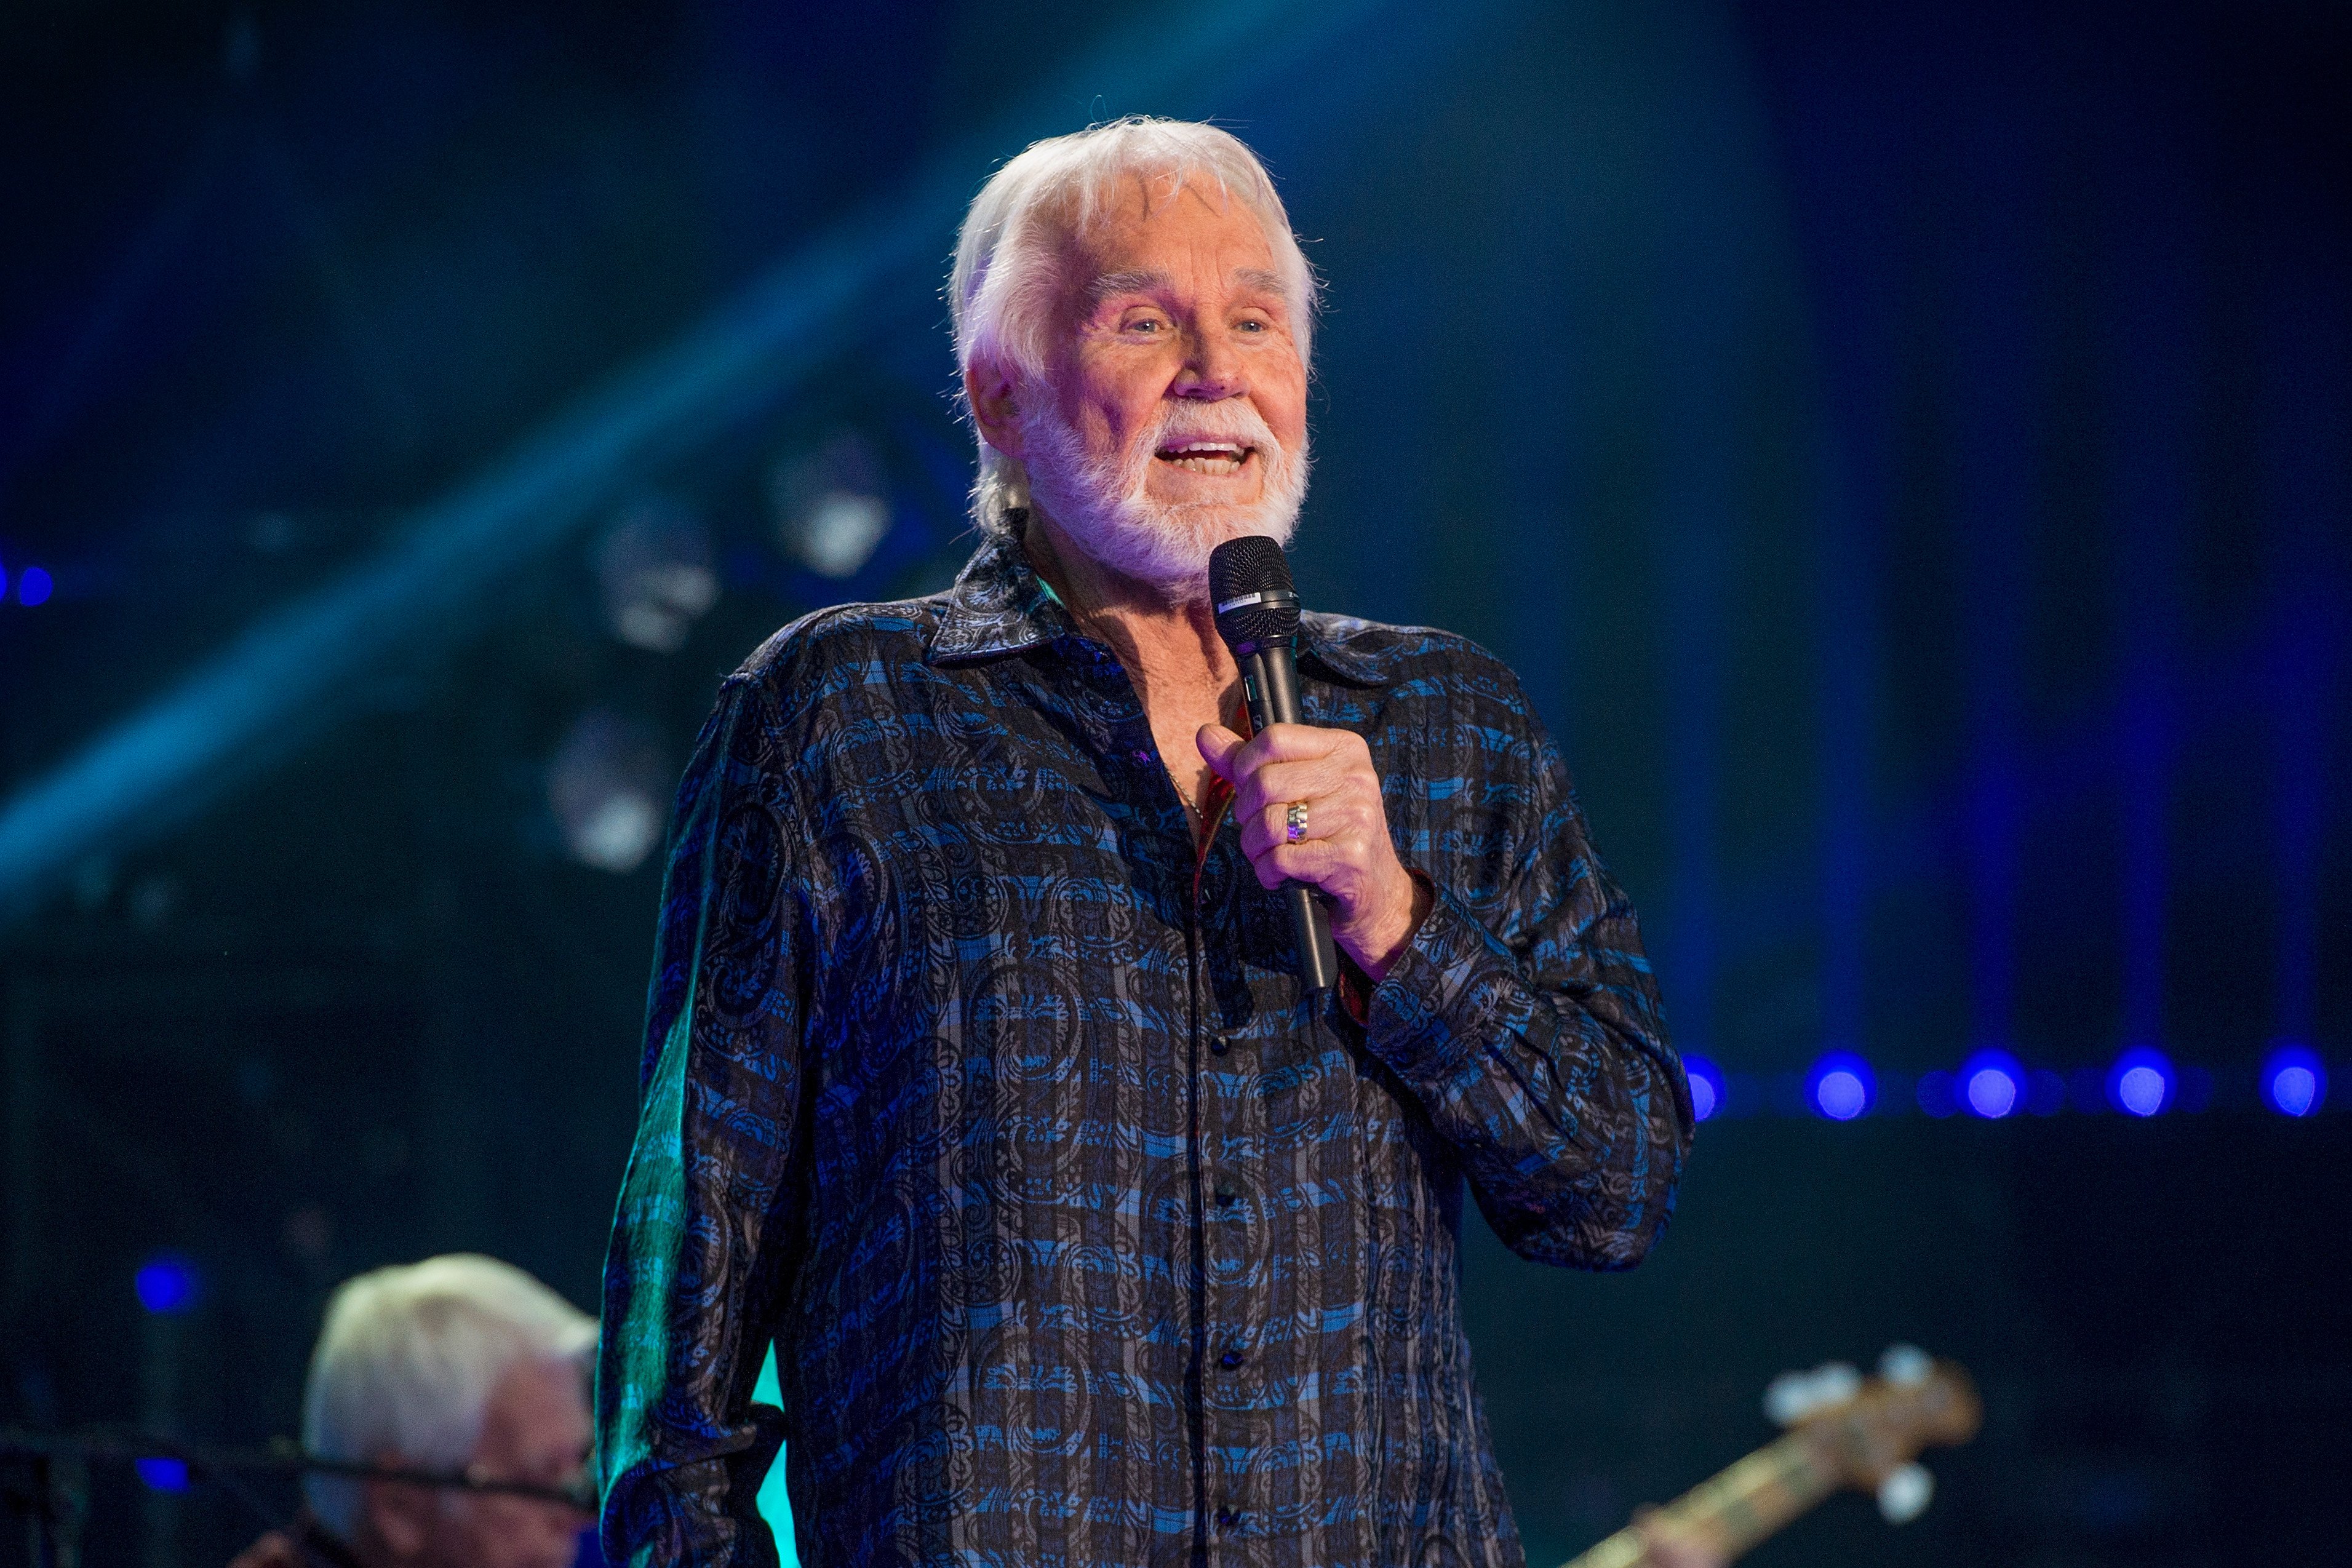 Country music singer Kenny Rogers performing during the 2017 CMA Music Festival on June 8, 2017 in Nashville, Tennessee. / Source: Getty Images